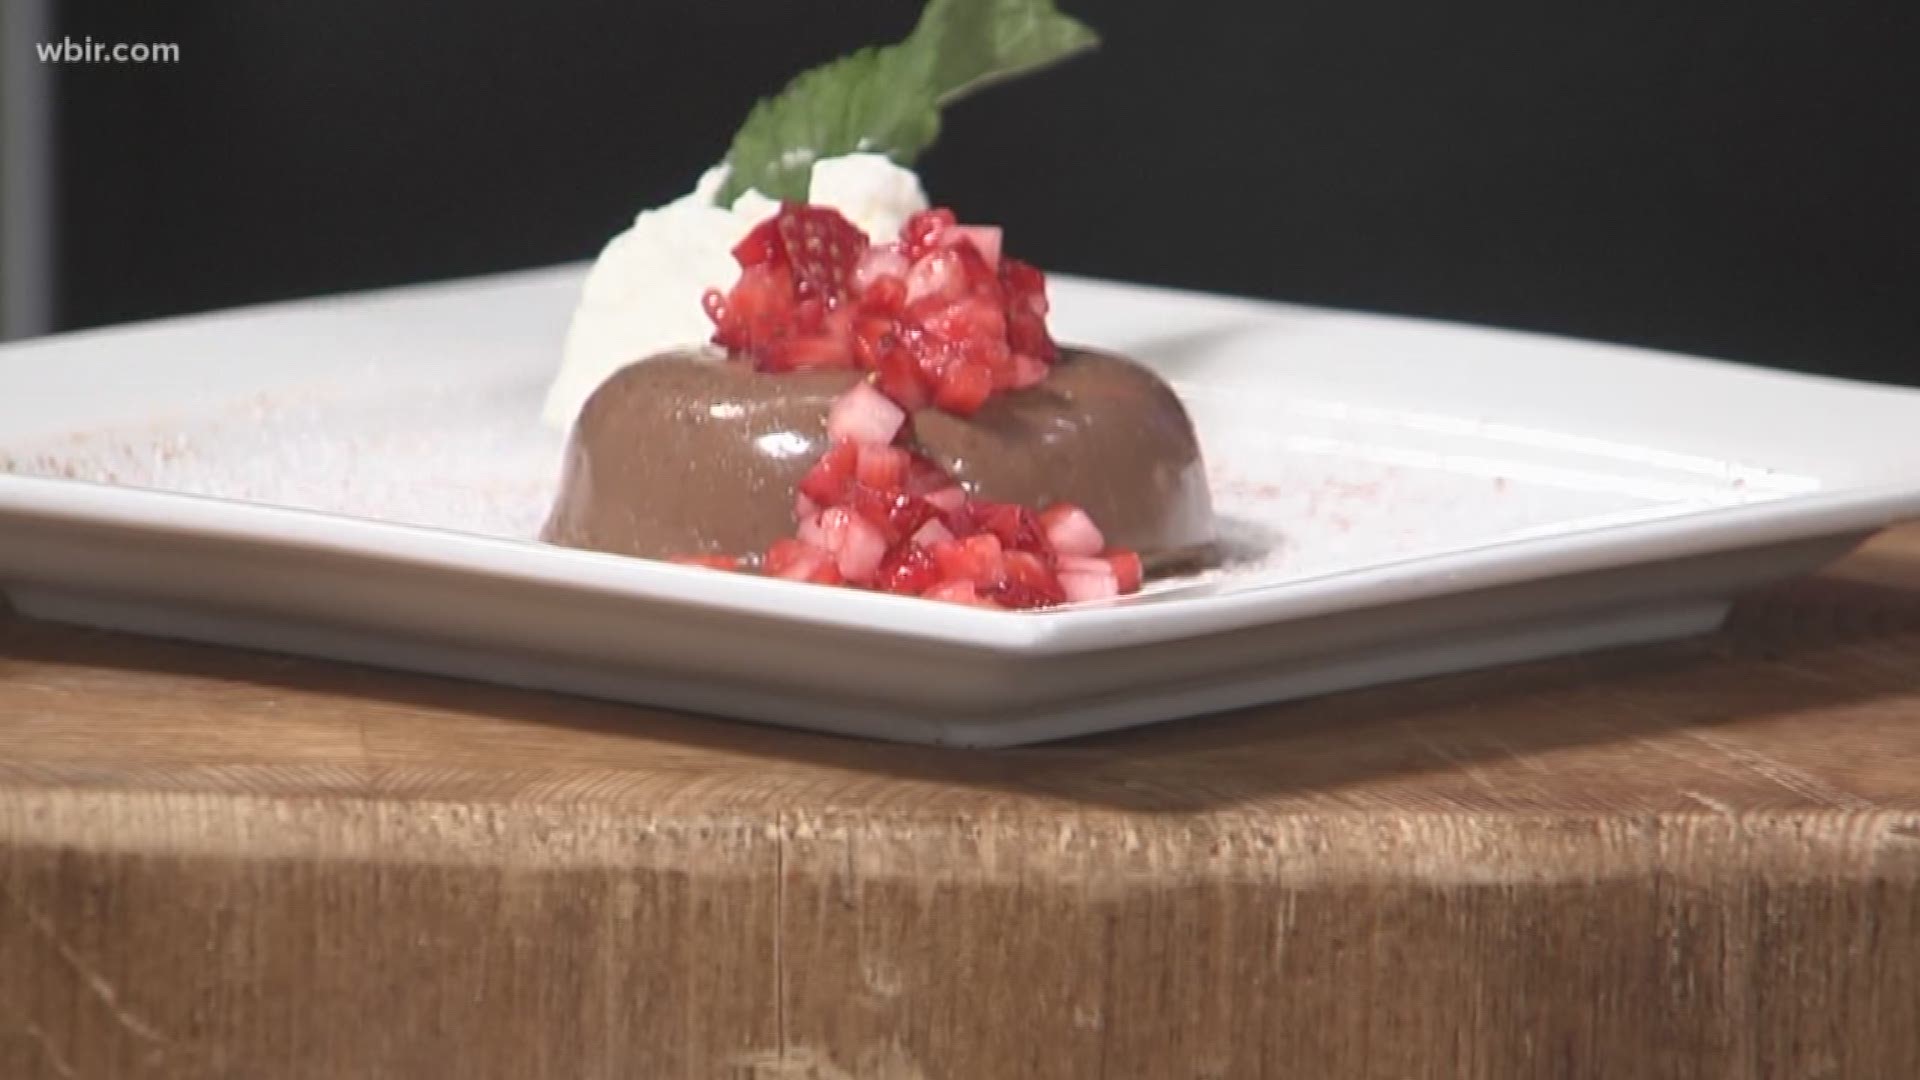 Chef Frank from Cappucino's Italian Restaurant in Knoxville cooks up a delicious dessert.